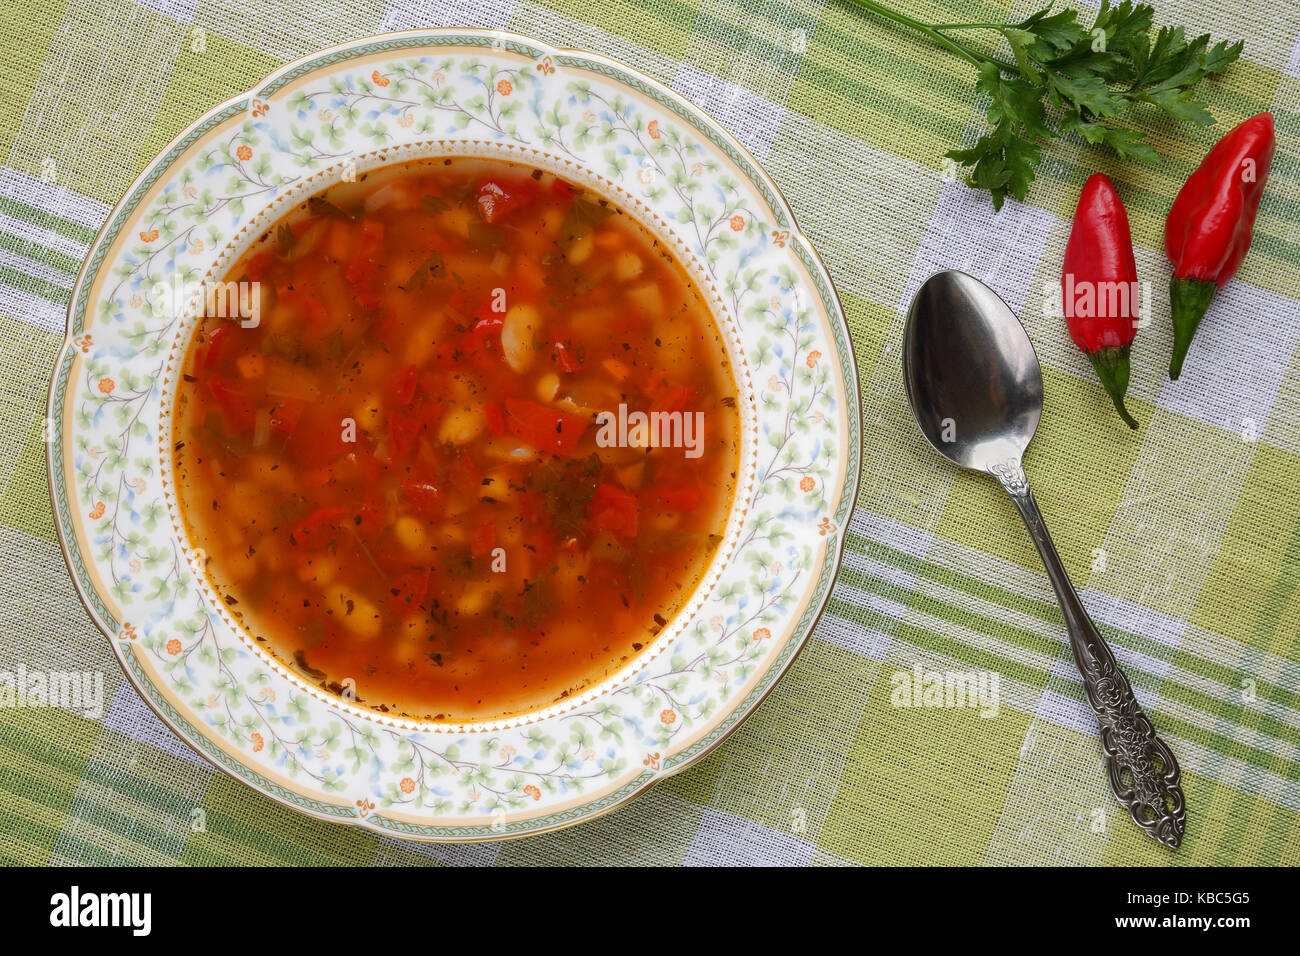 Homemade delicious traditional bulgarian bean soup (bob chorba) with pepper, tomatoes, onion and spices, served with red chili peppers Stock Photo